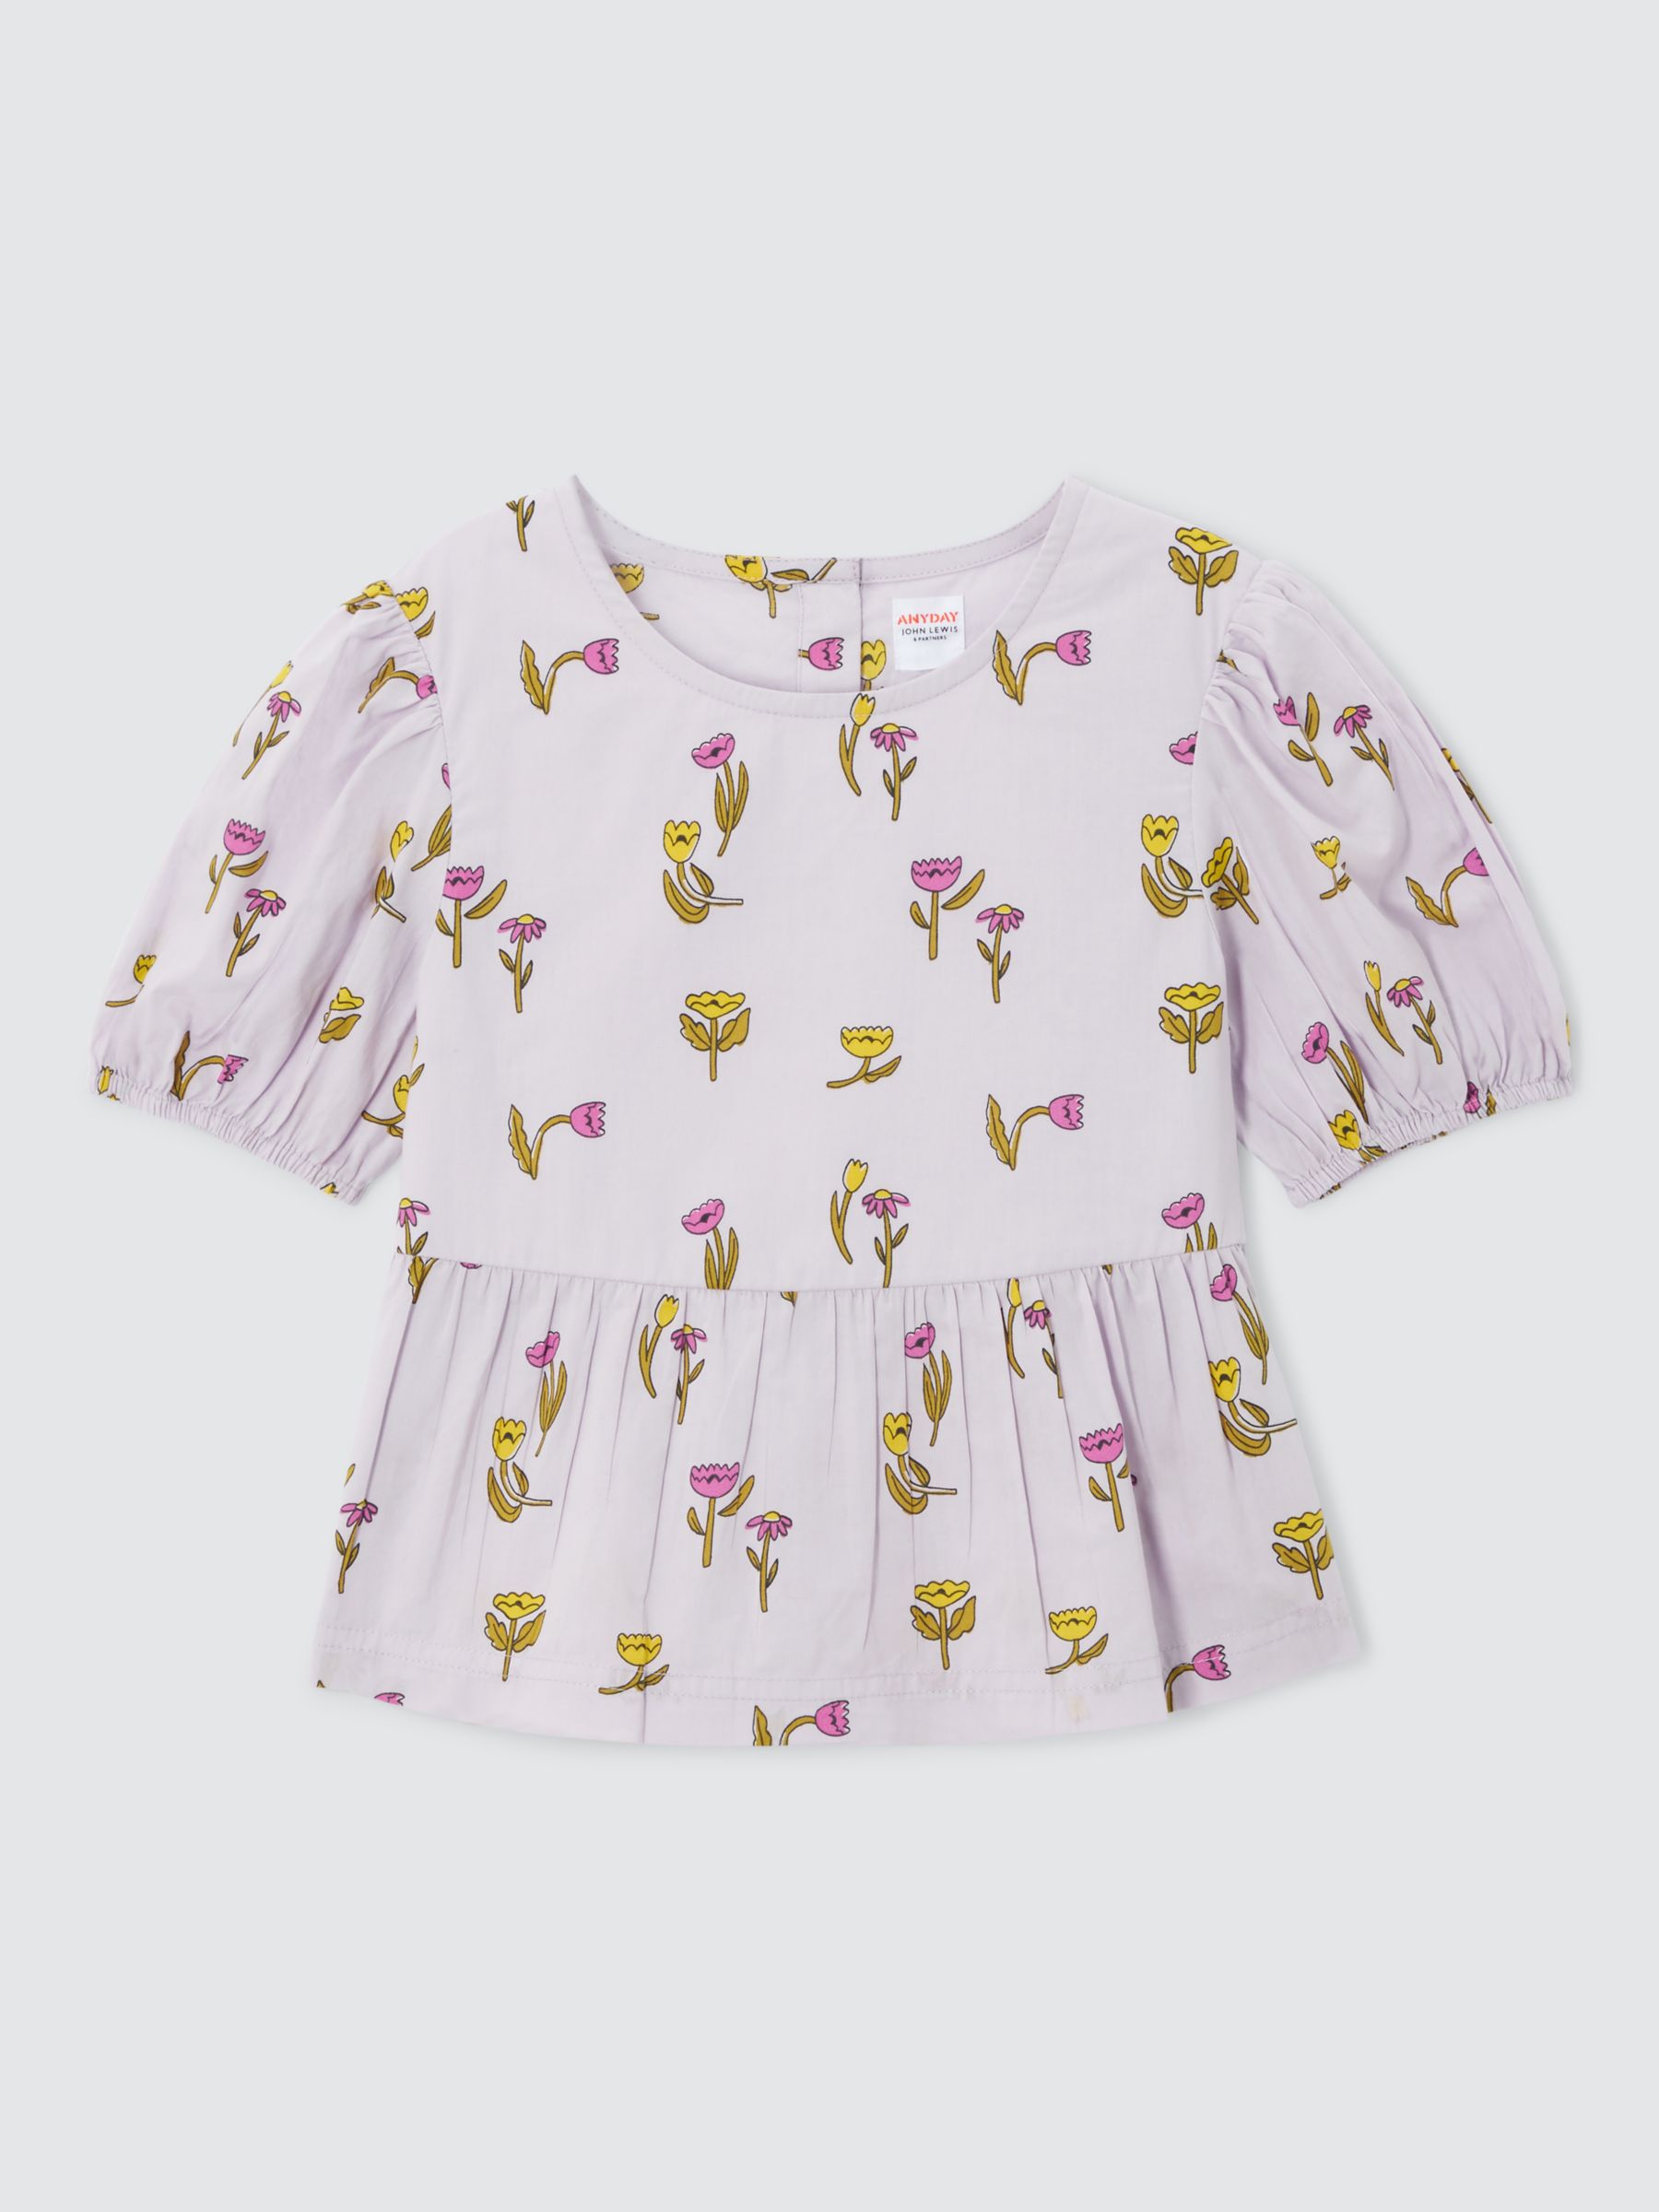 John Lewis ANYDAY Kids' Flower Print Top, Lilac, 2 years